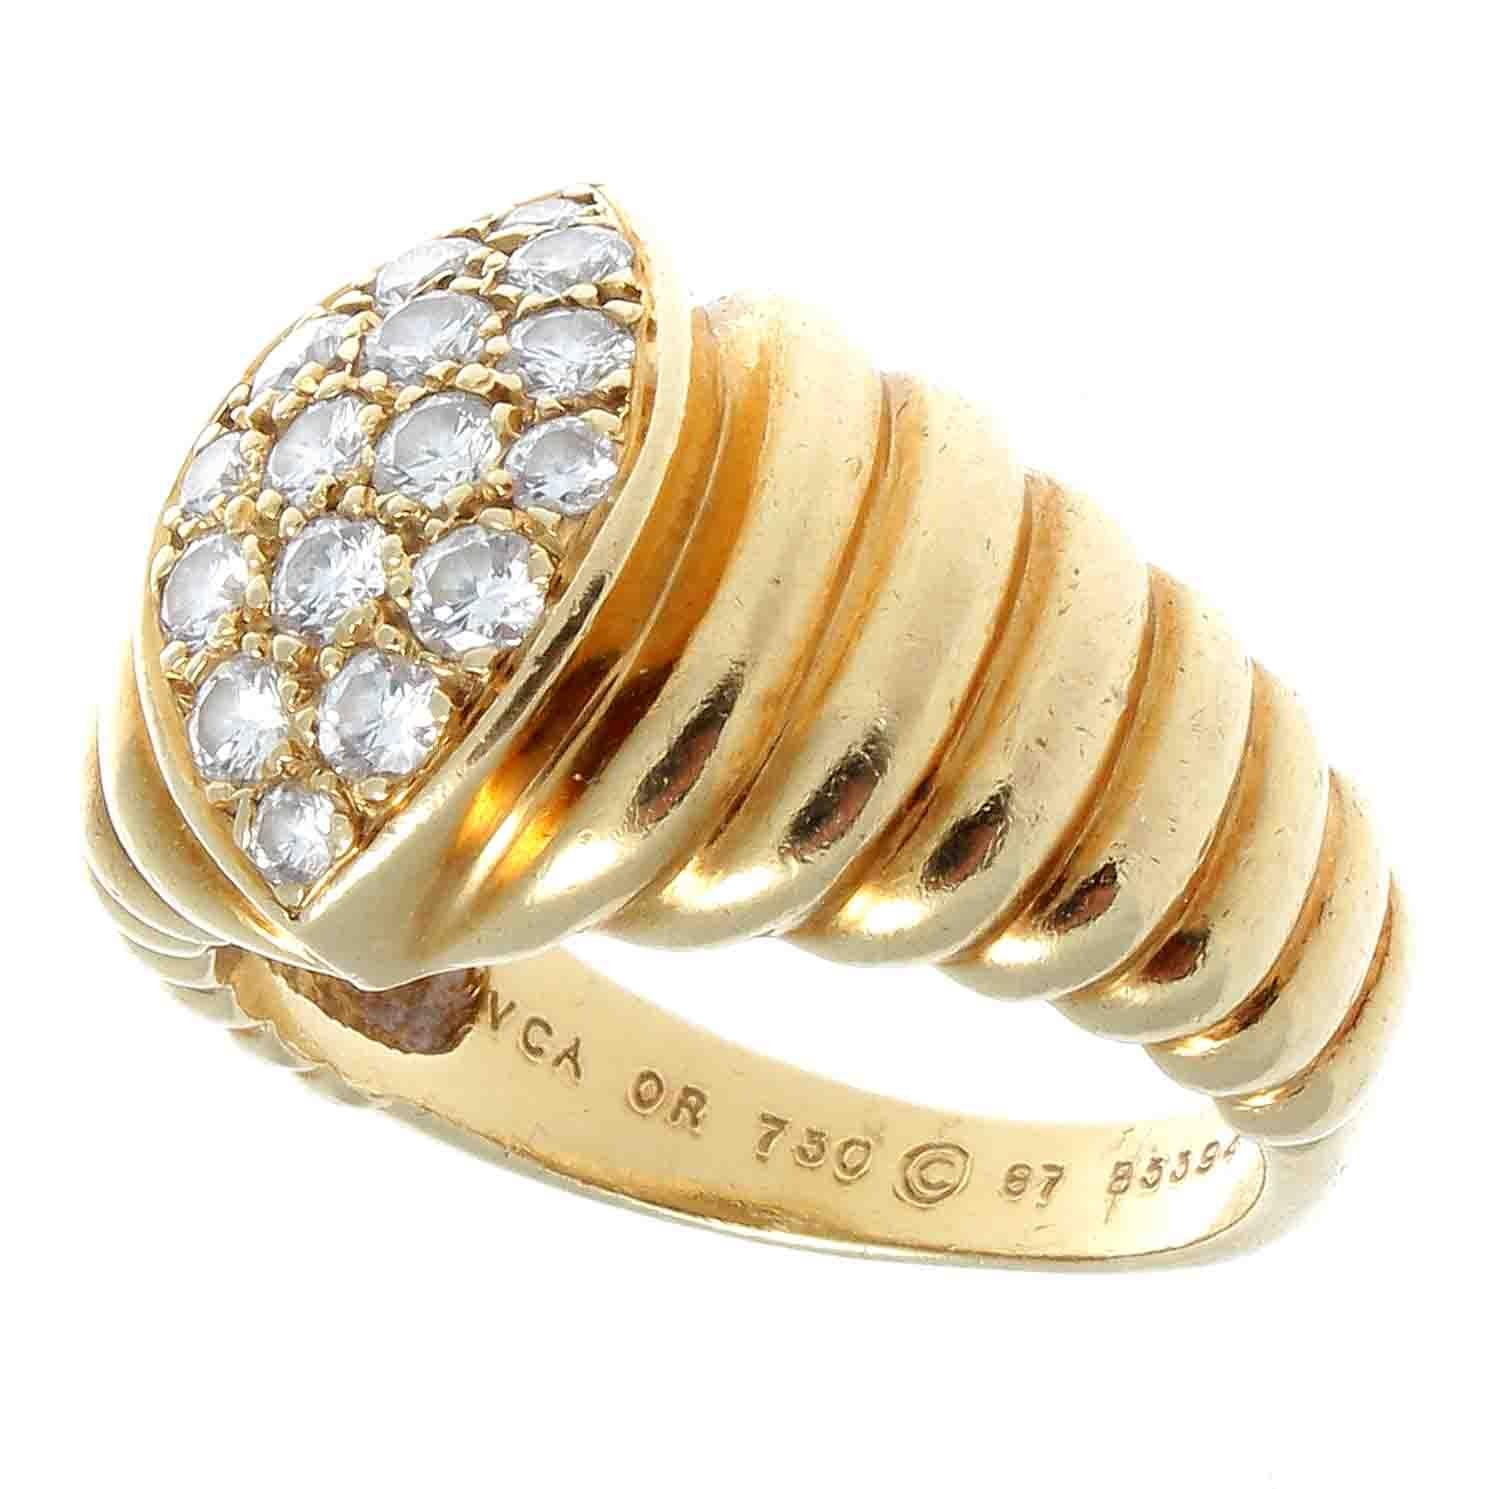 A symmetrical and eye pleasing design classically made fashionable by the creators at VCA. Featuring 16 white clean well matched diamonds set in hand crafted 18 yellow gold. Signed VCA, numbered and stamped with French hallmarks. Ring size 6 and may